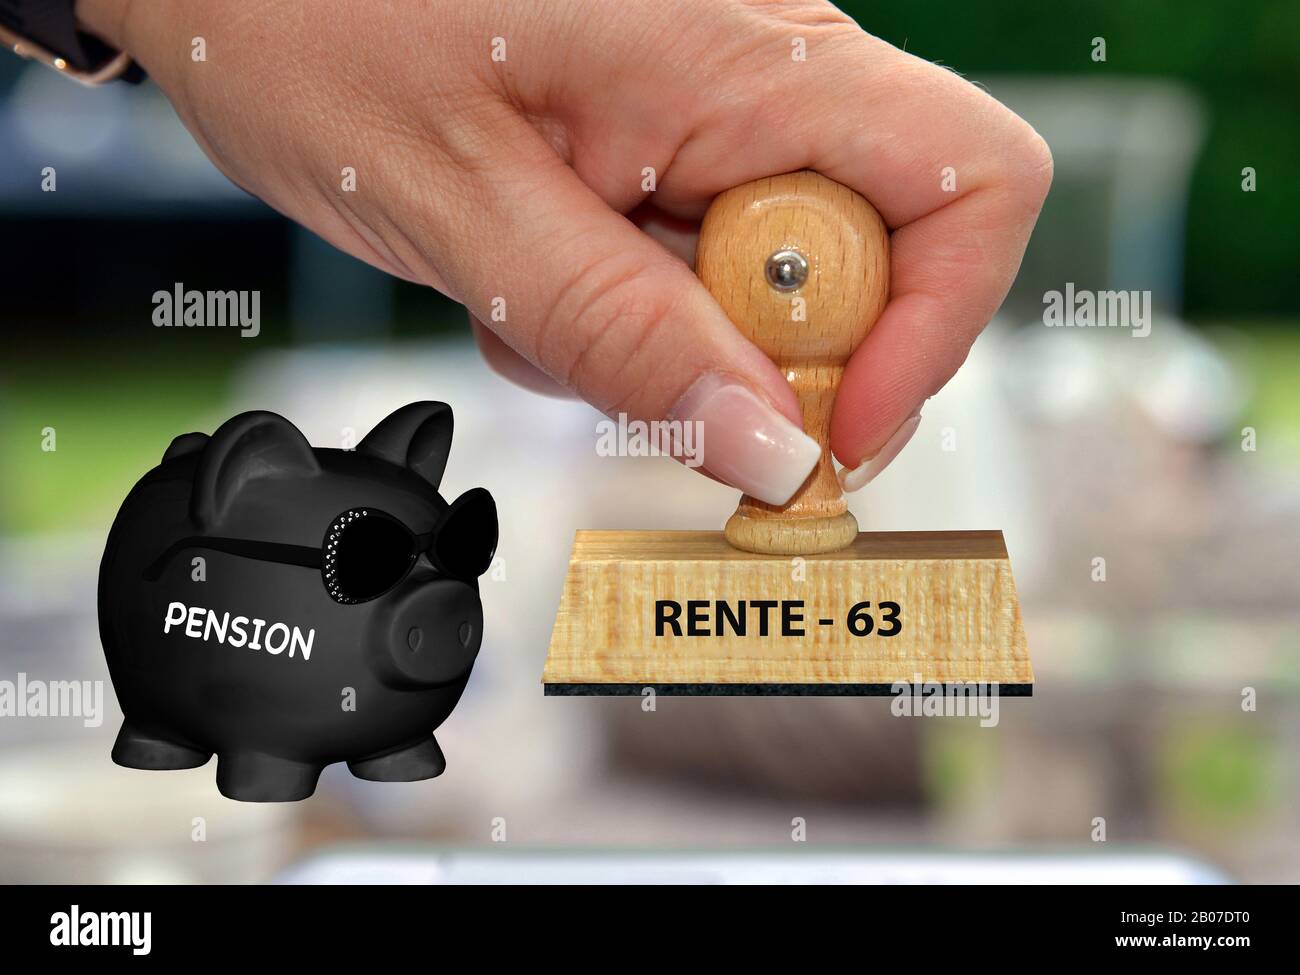 black piggy bank with sunglasses and lettering Pension, stamp 'pension - 63' in background, composing Stock Photo